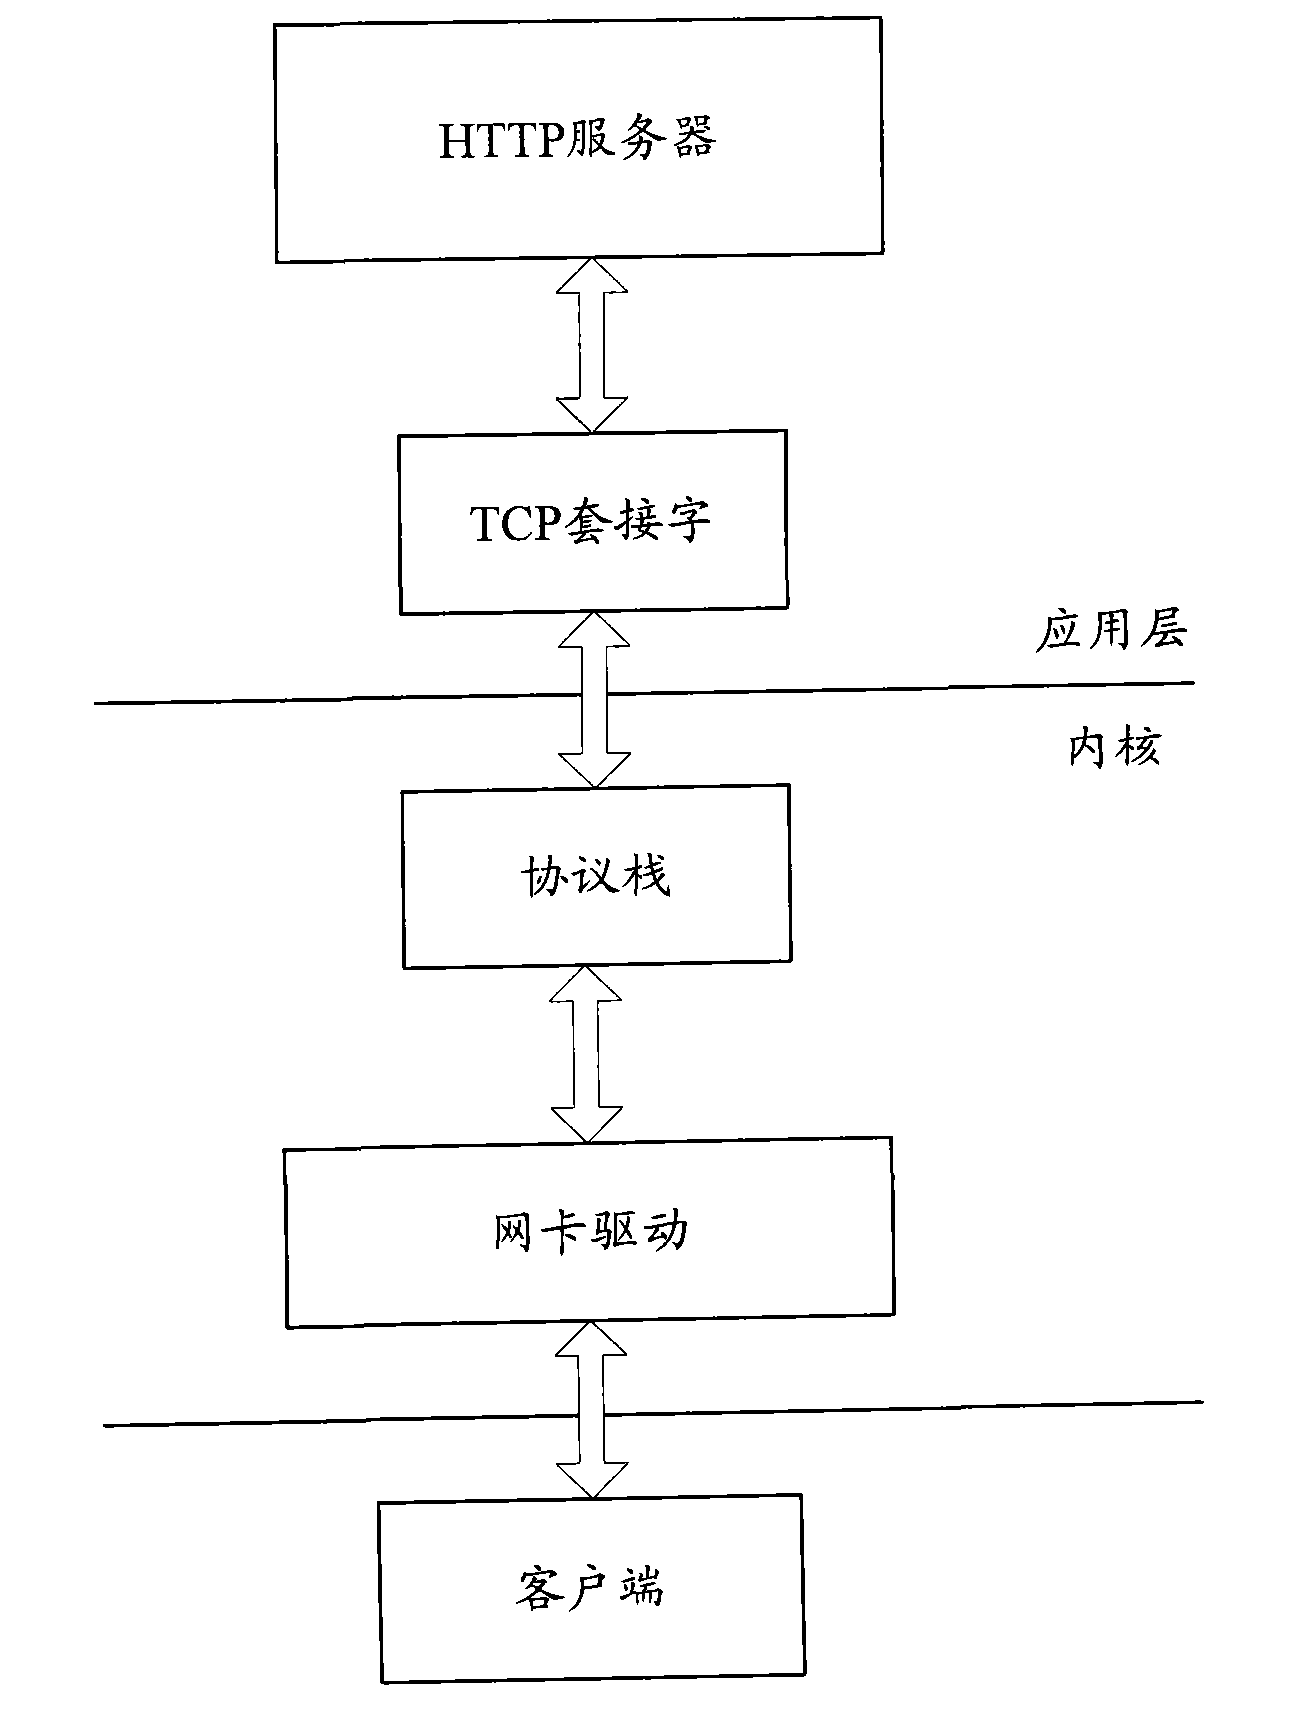 Packet processing-based HTTP server and data processing method thereof